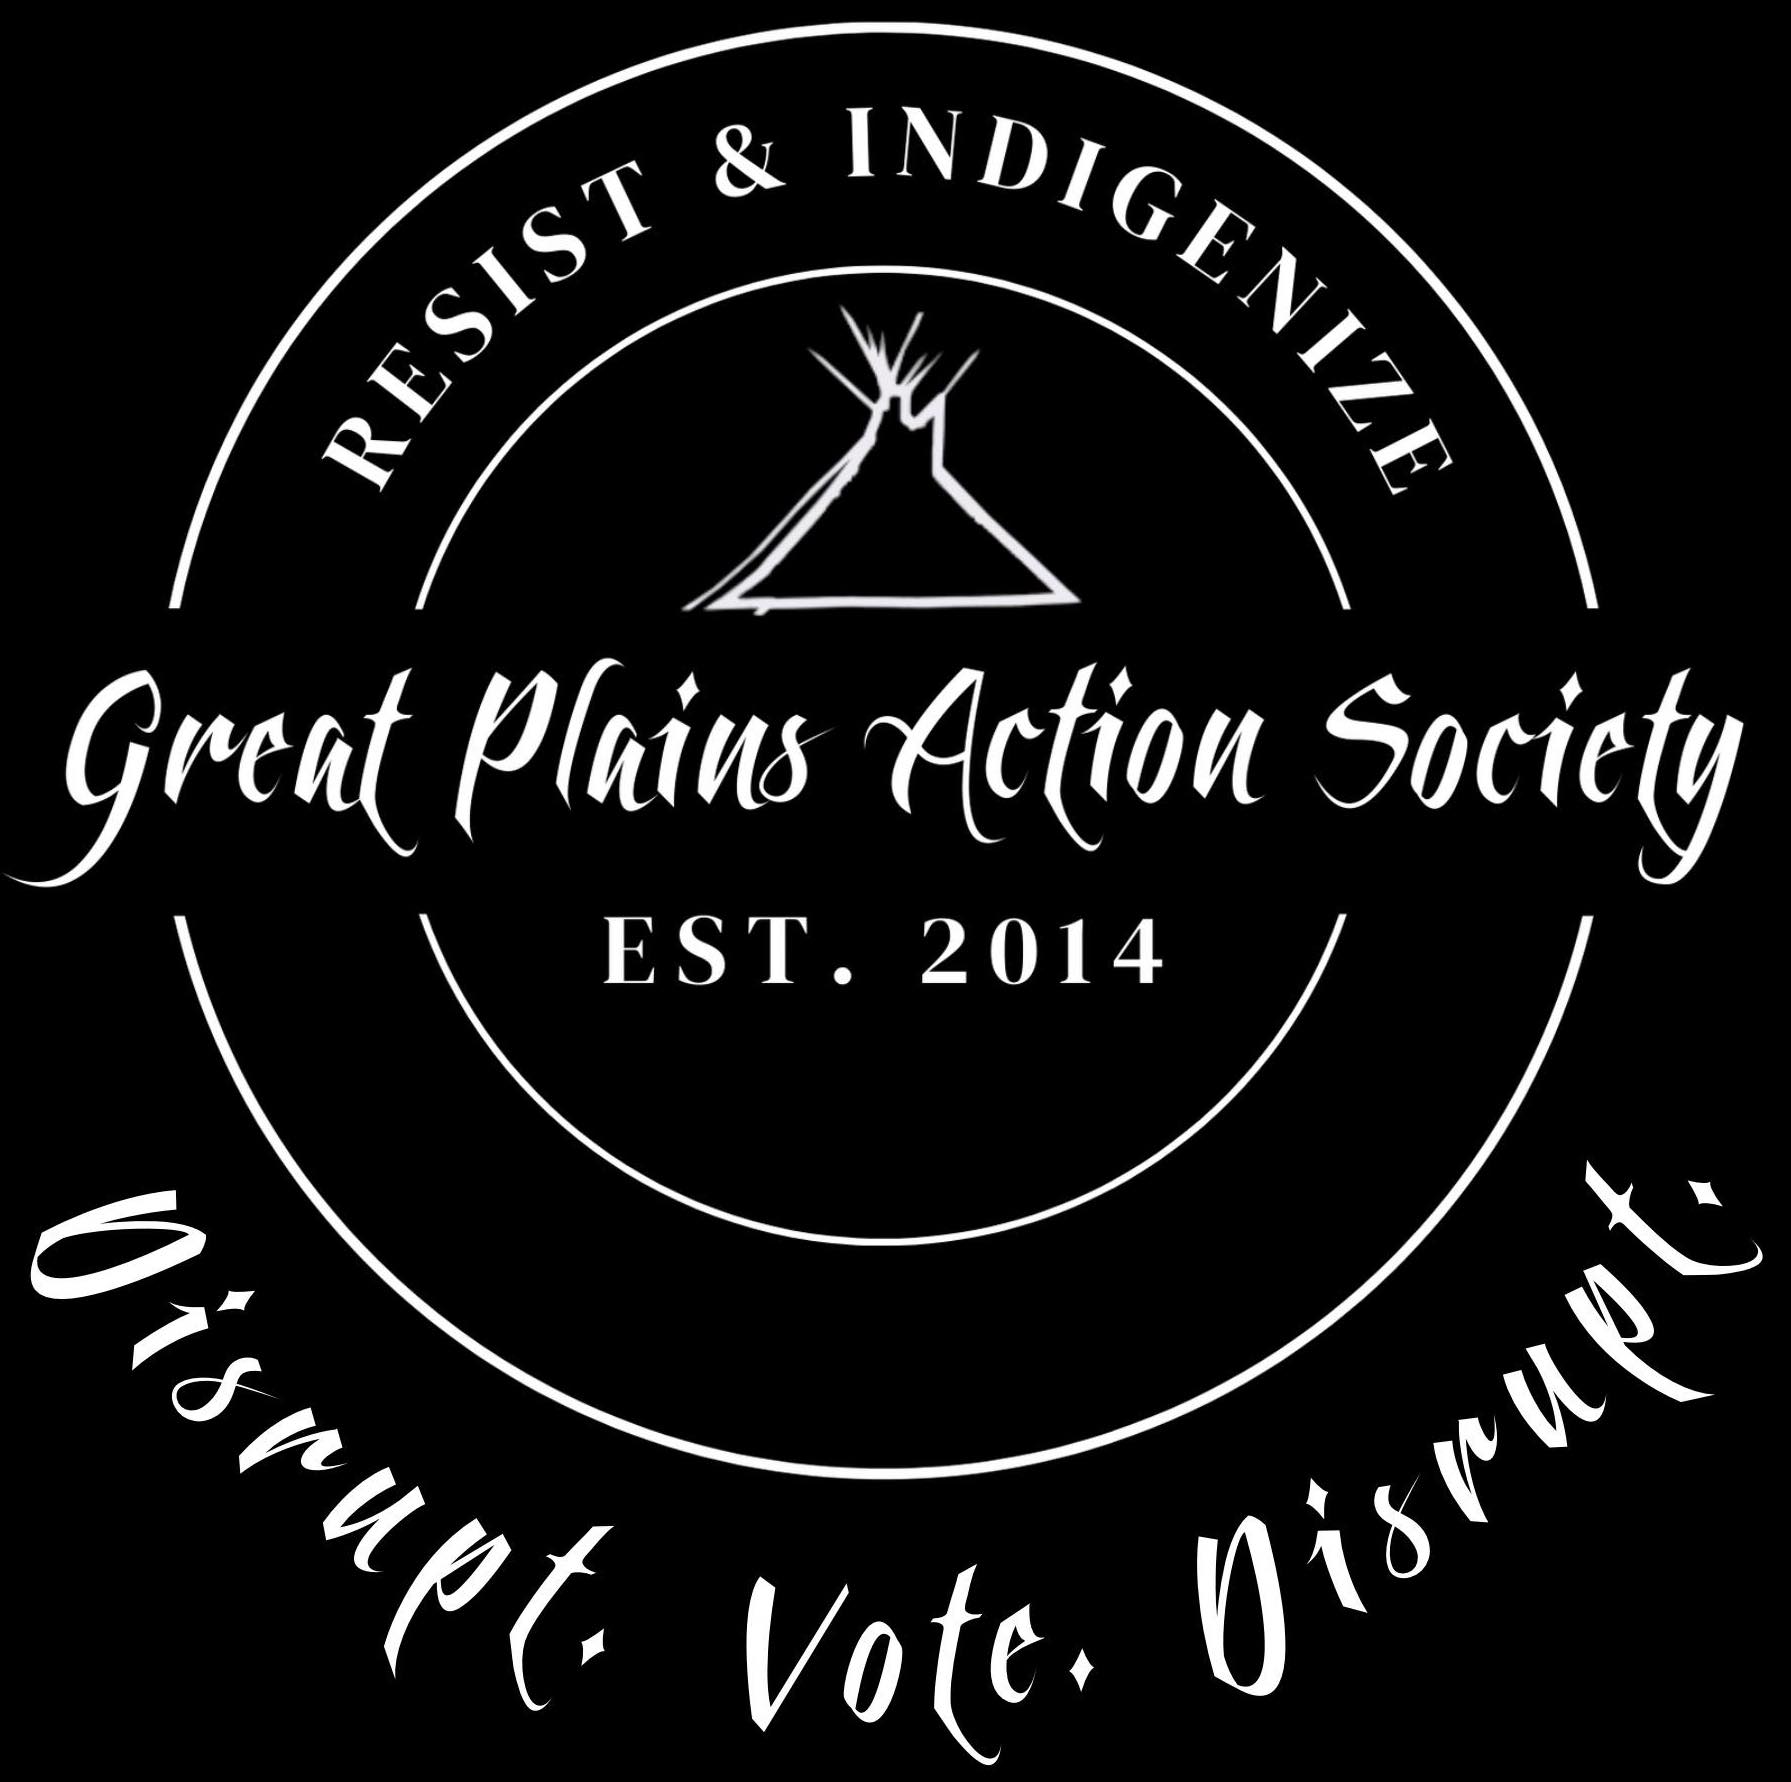 Great Plains Action Society